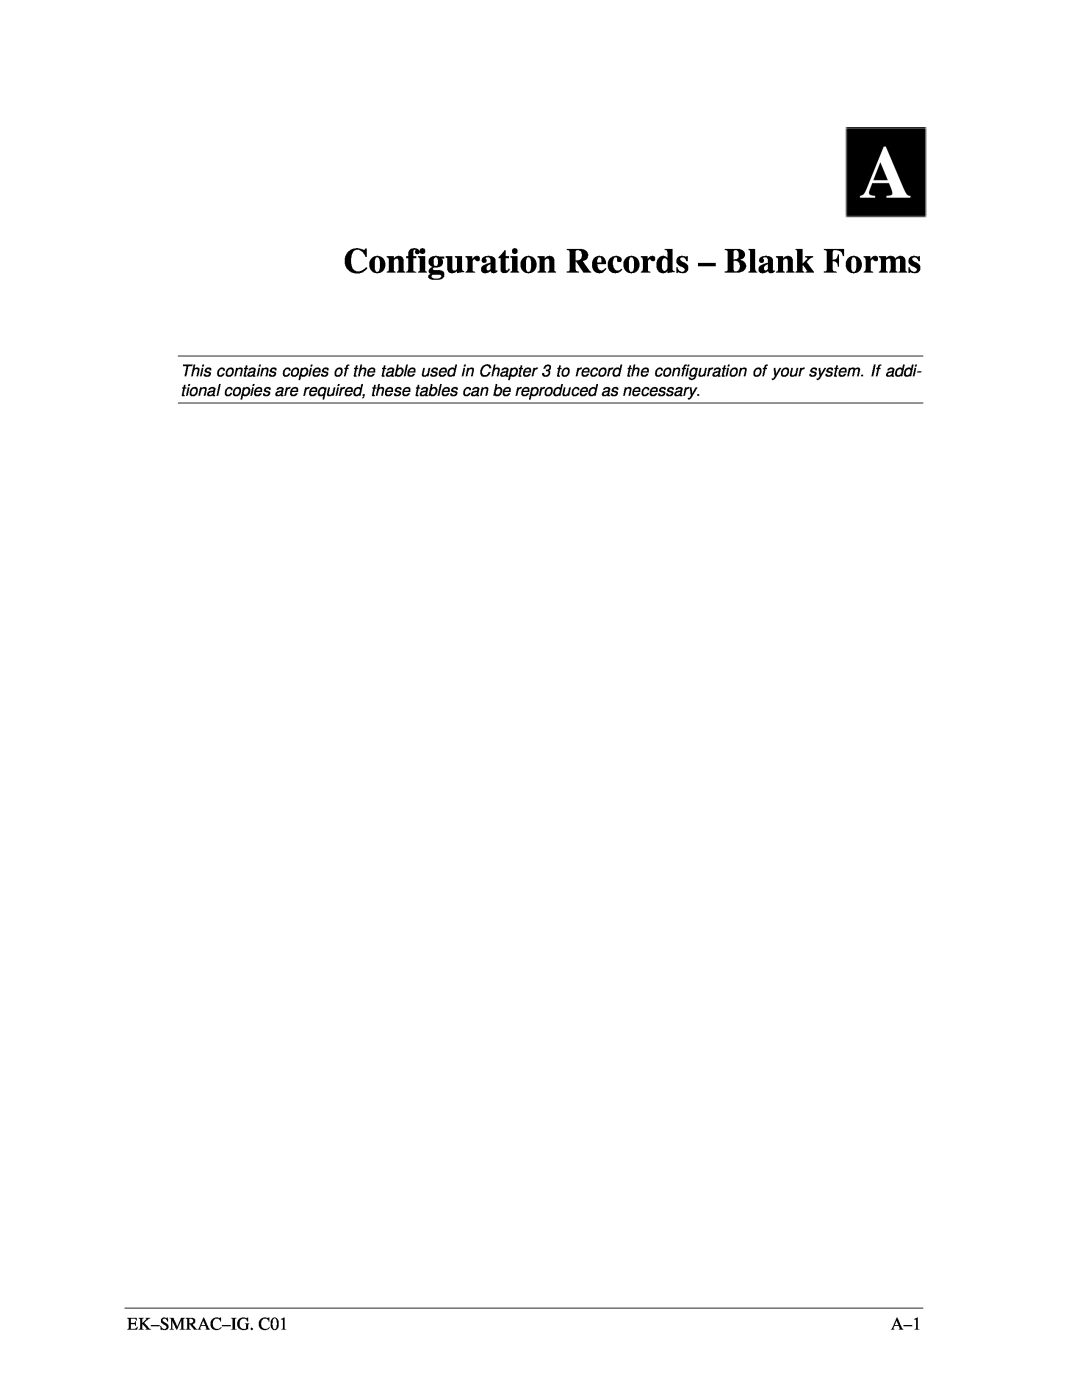 Intel 410 manual Configuration Records – Blank Forms 